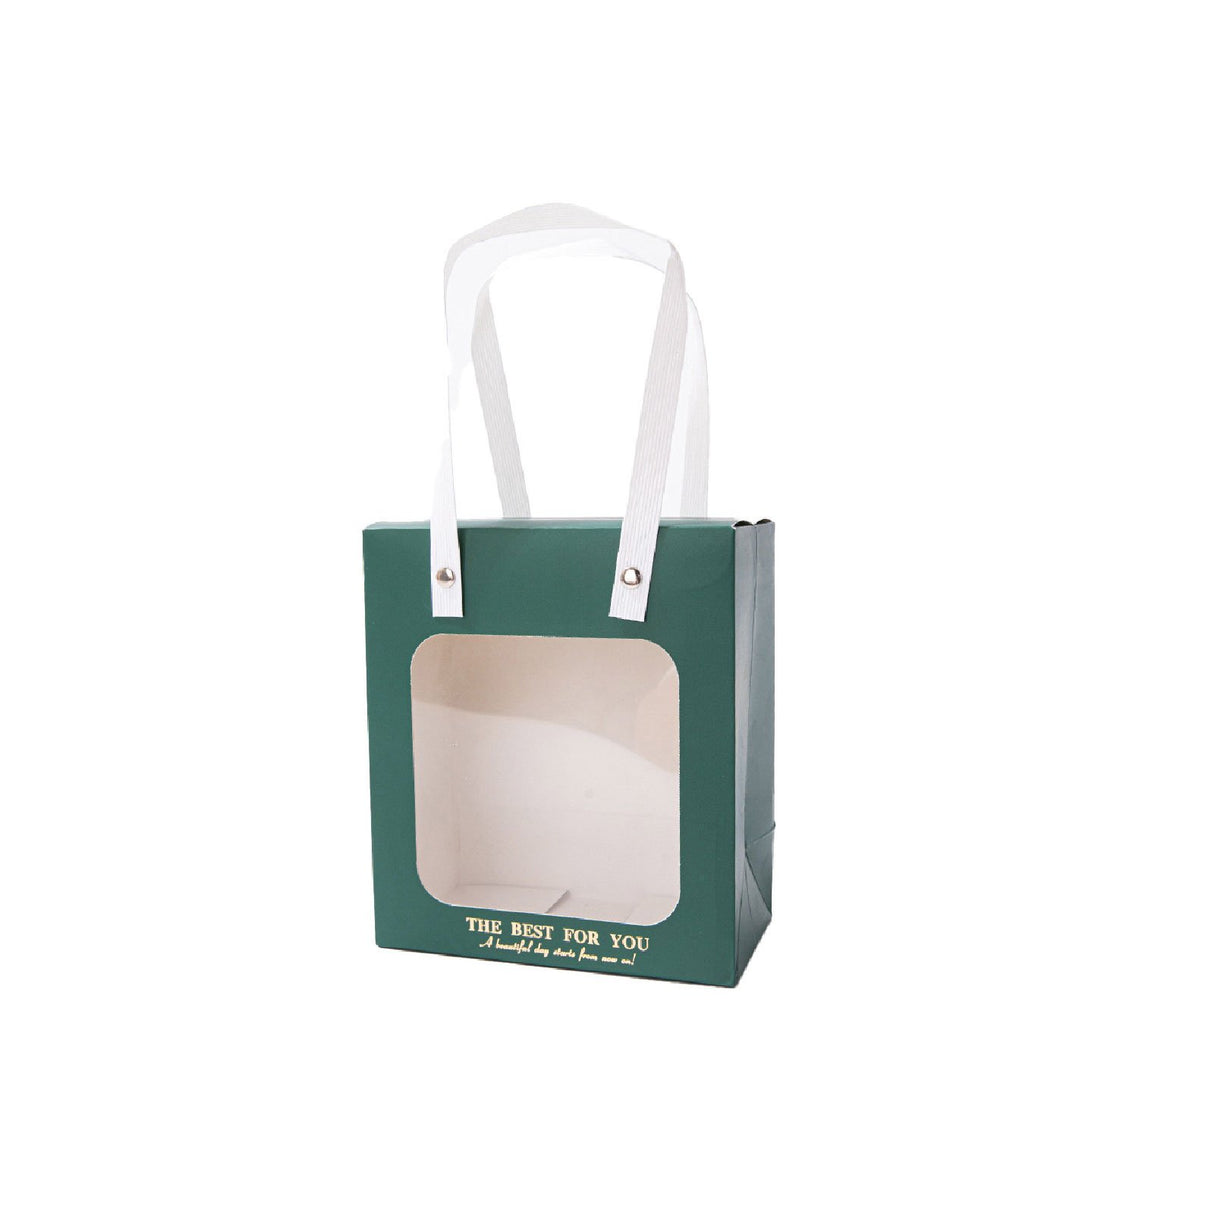 Enhance Your Gift Presentation with Stylish Window Gift Bags